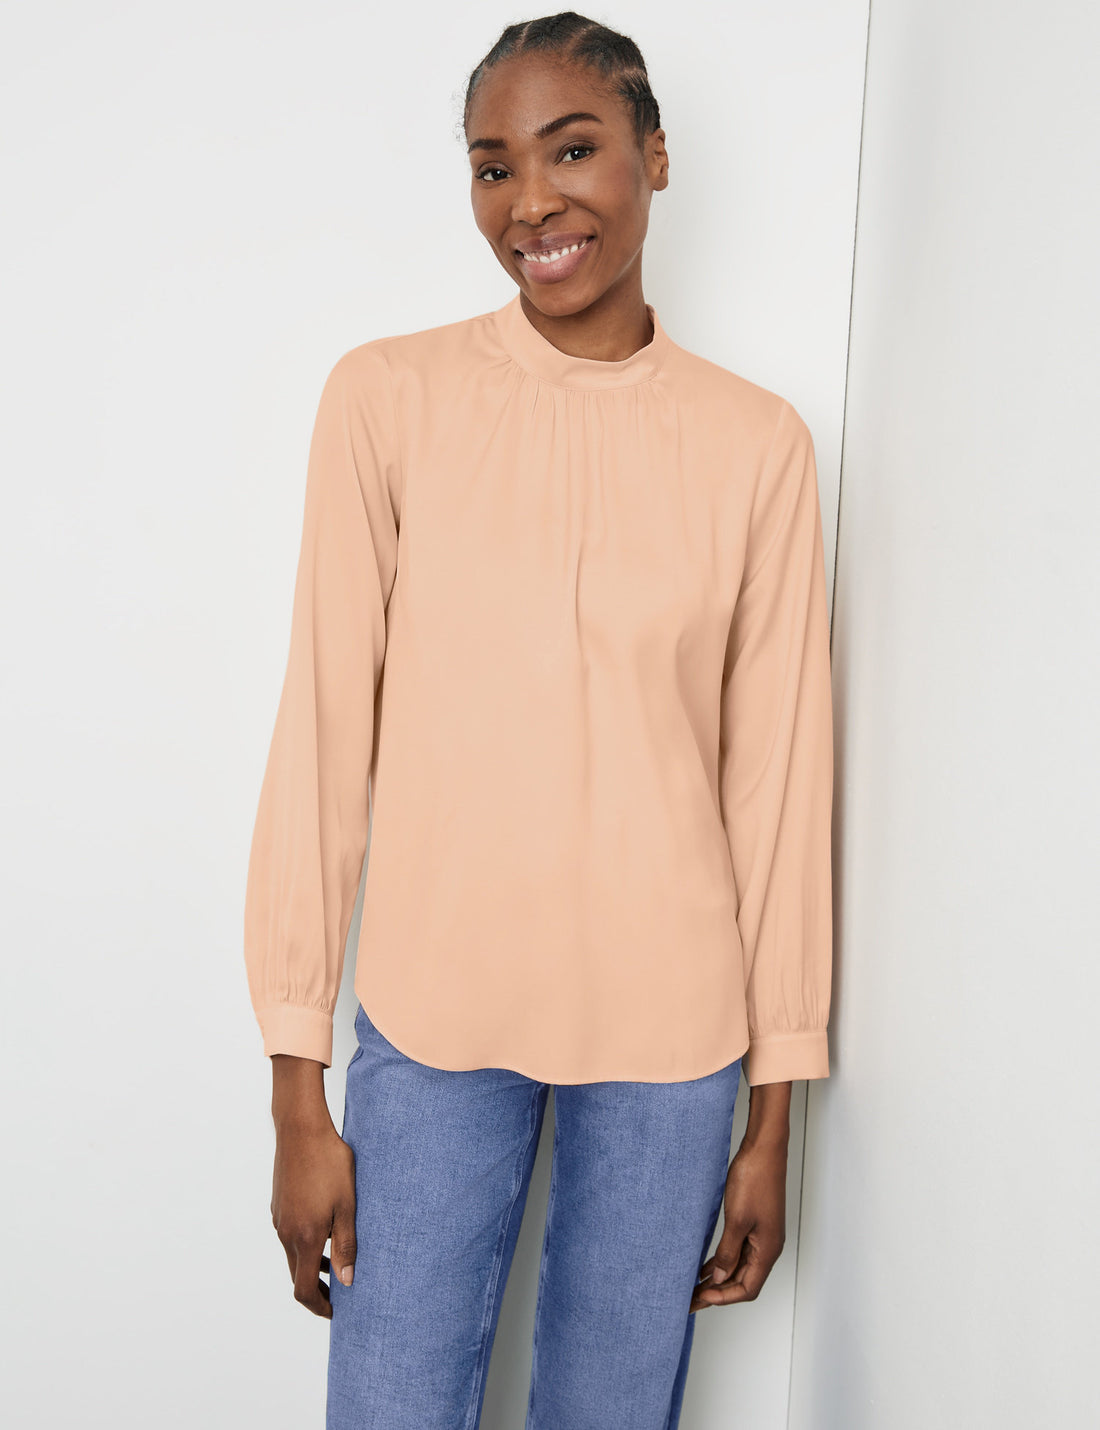 Flowing Blouse With A Stand-Up Collar_360067-31460_60709_01